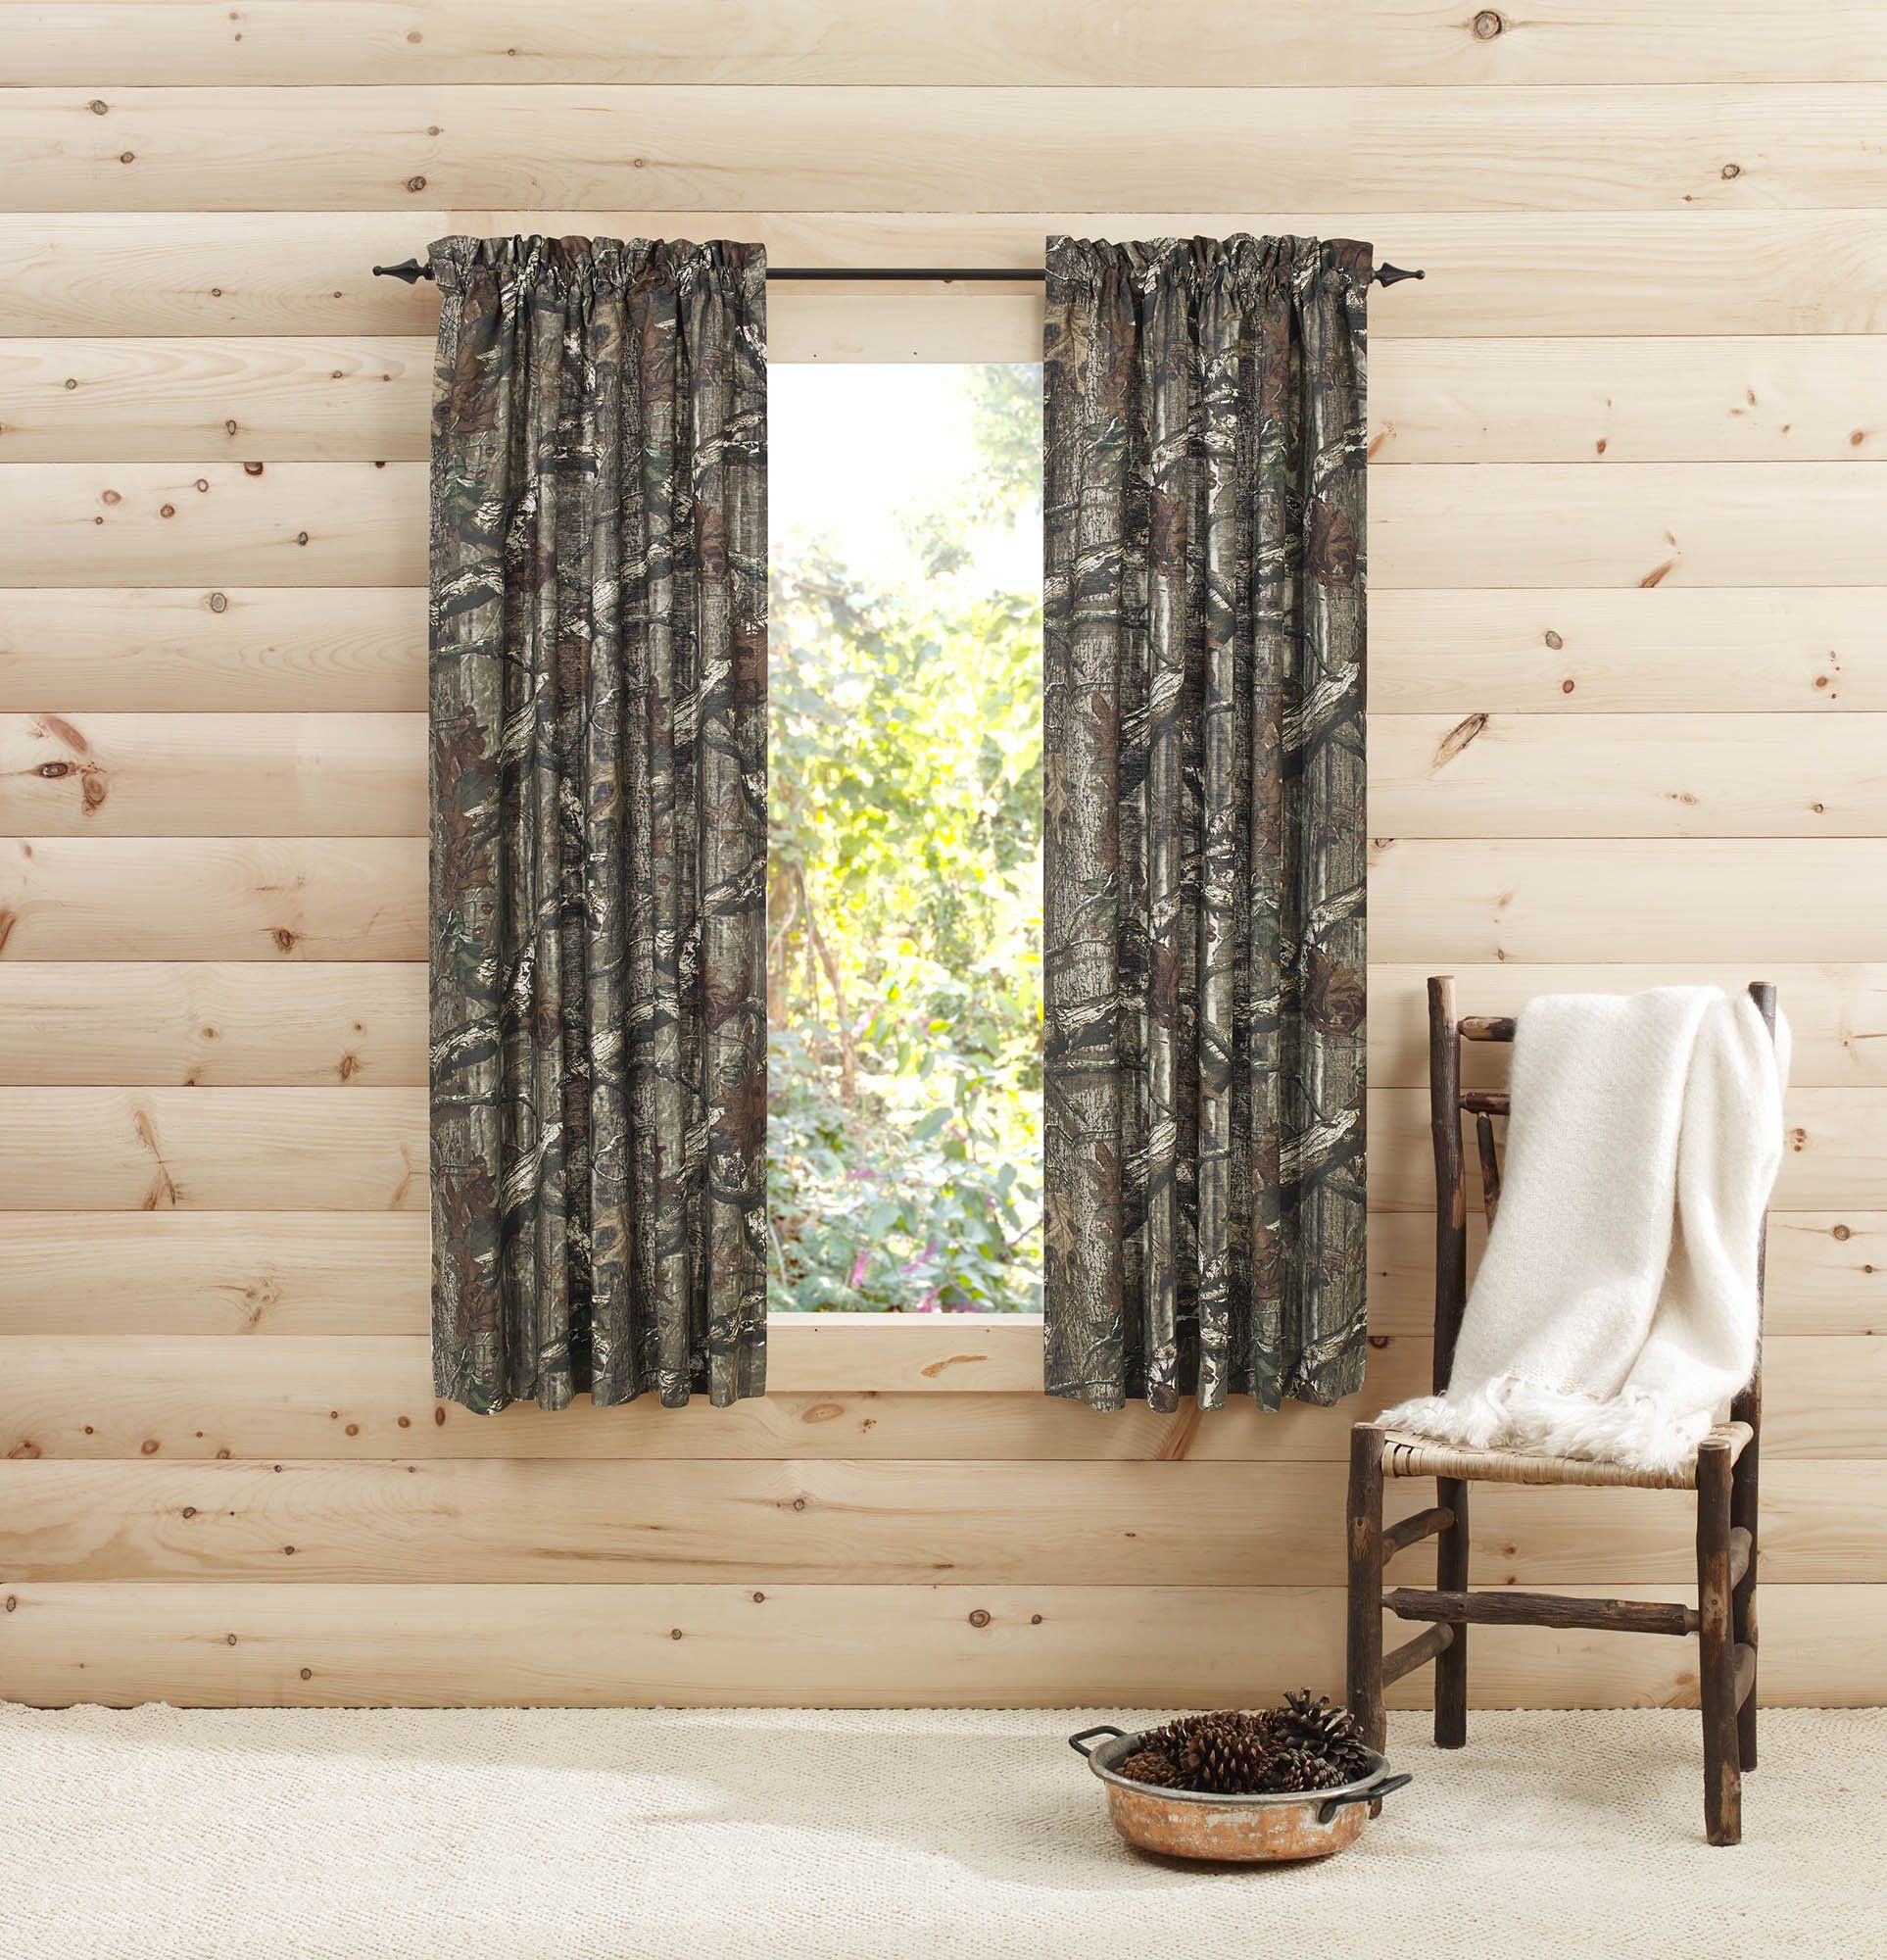 Camo Blackout Curtains: A Stylish Solution for Blocking Light